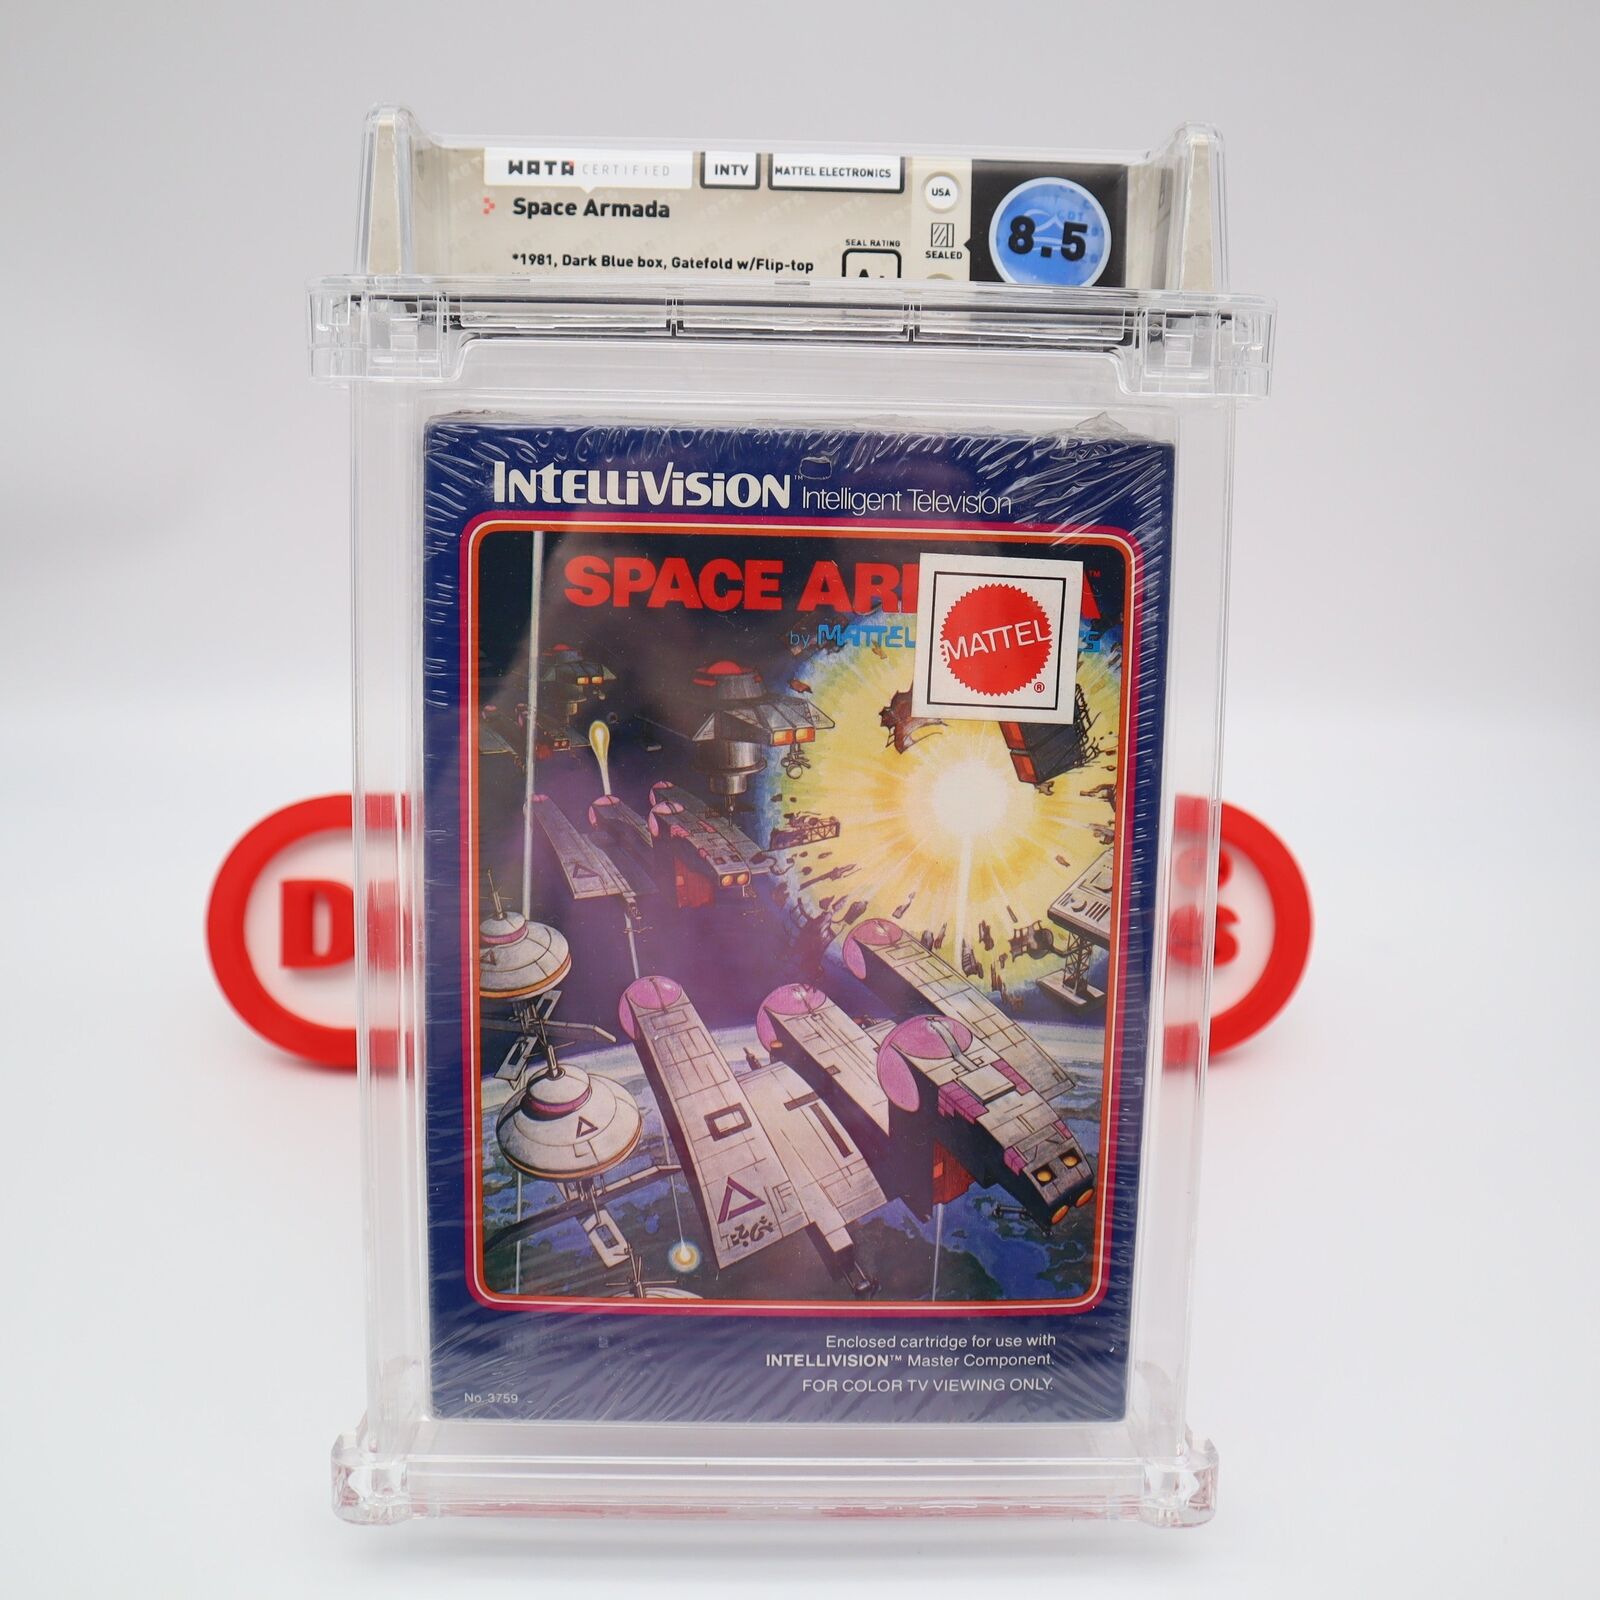 Intellivision Game SPACE ARMADA - WATA GRADED 8.5 A+! NEW & Factory Sealed!